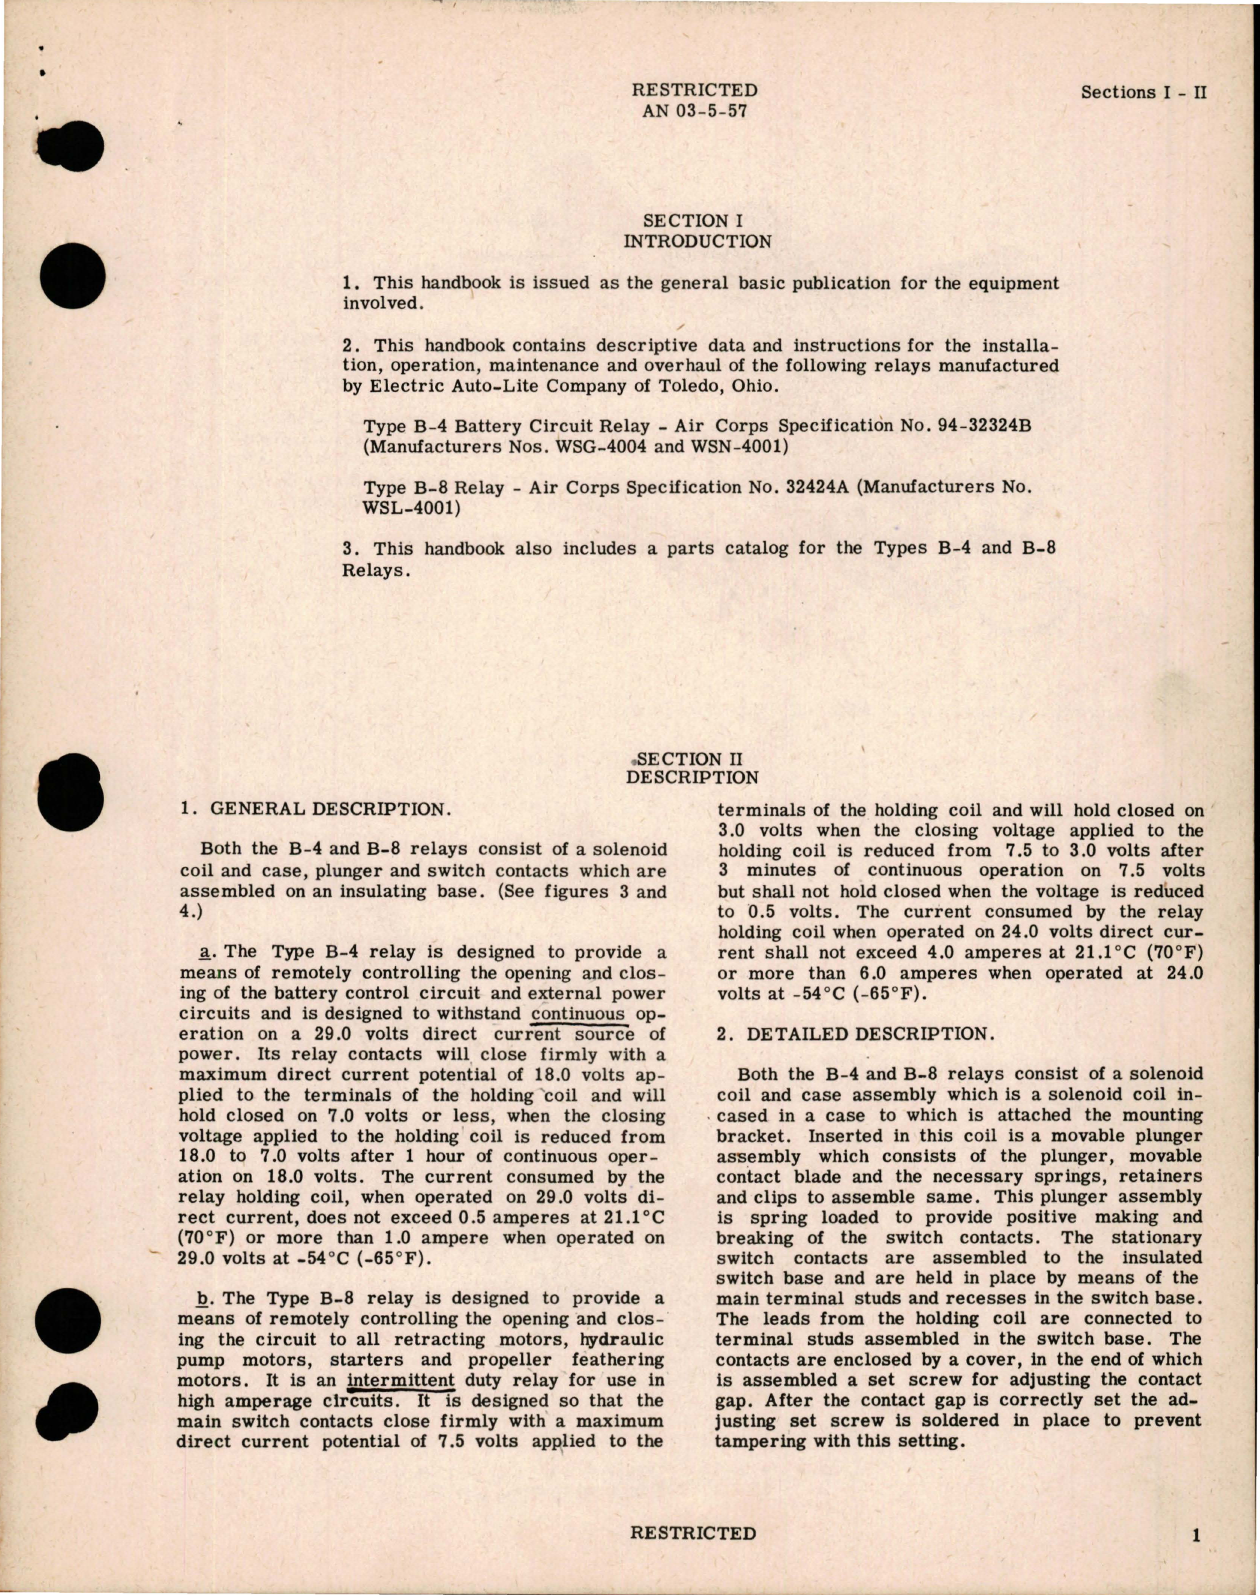 Sample page 5 from AirCorps Library document: Instructions with Parts Catalog for Relays - Types B-4 and B-8 